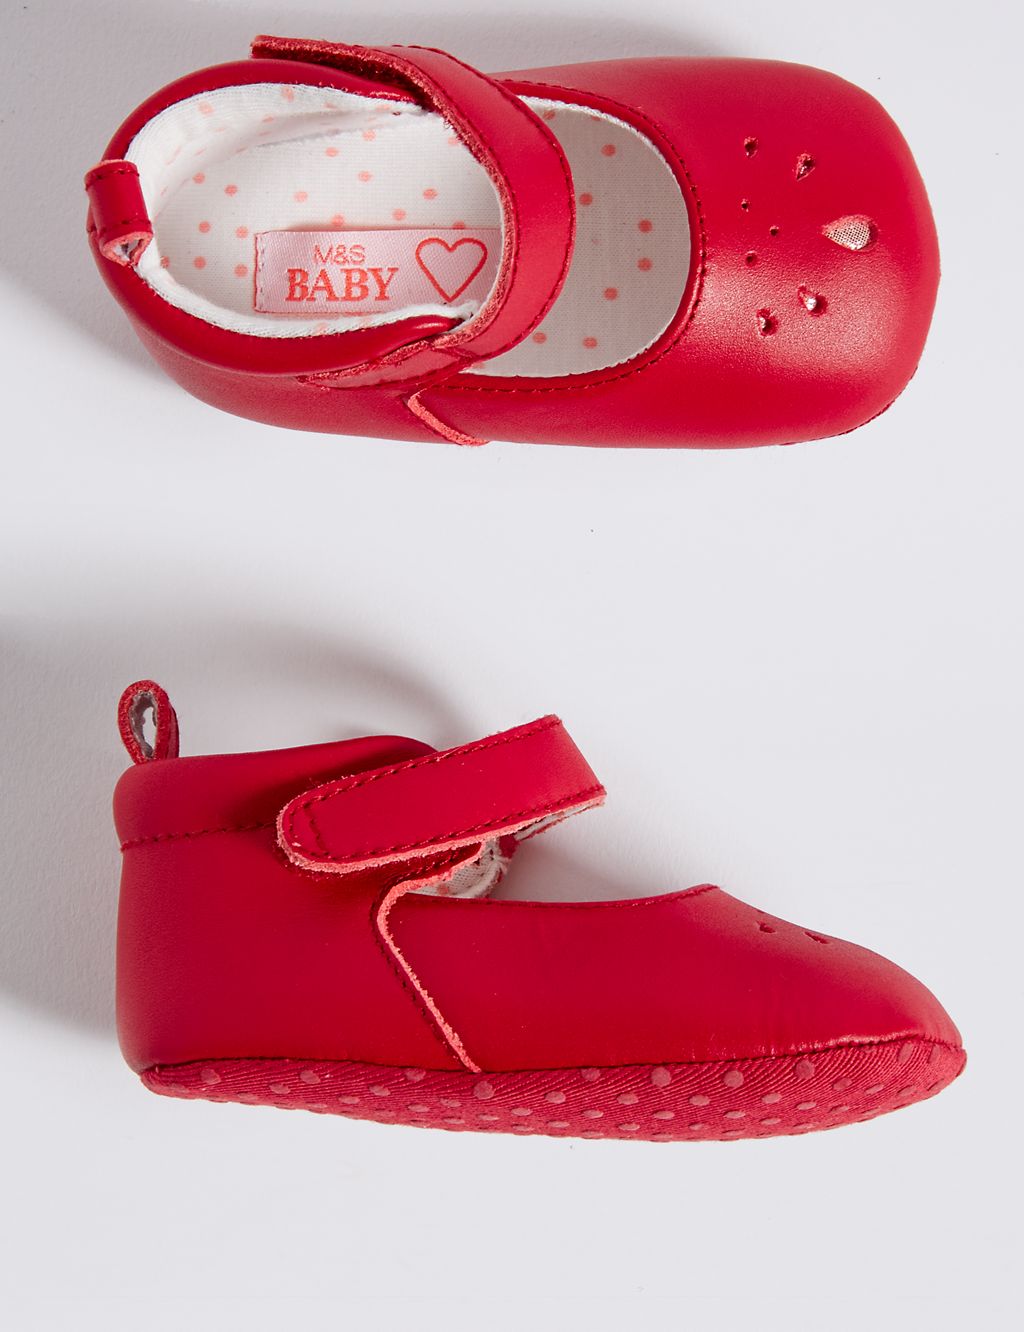 Baby Leather Riptape Pram Shoes 1 of 4